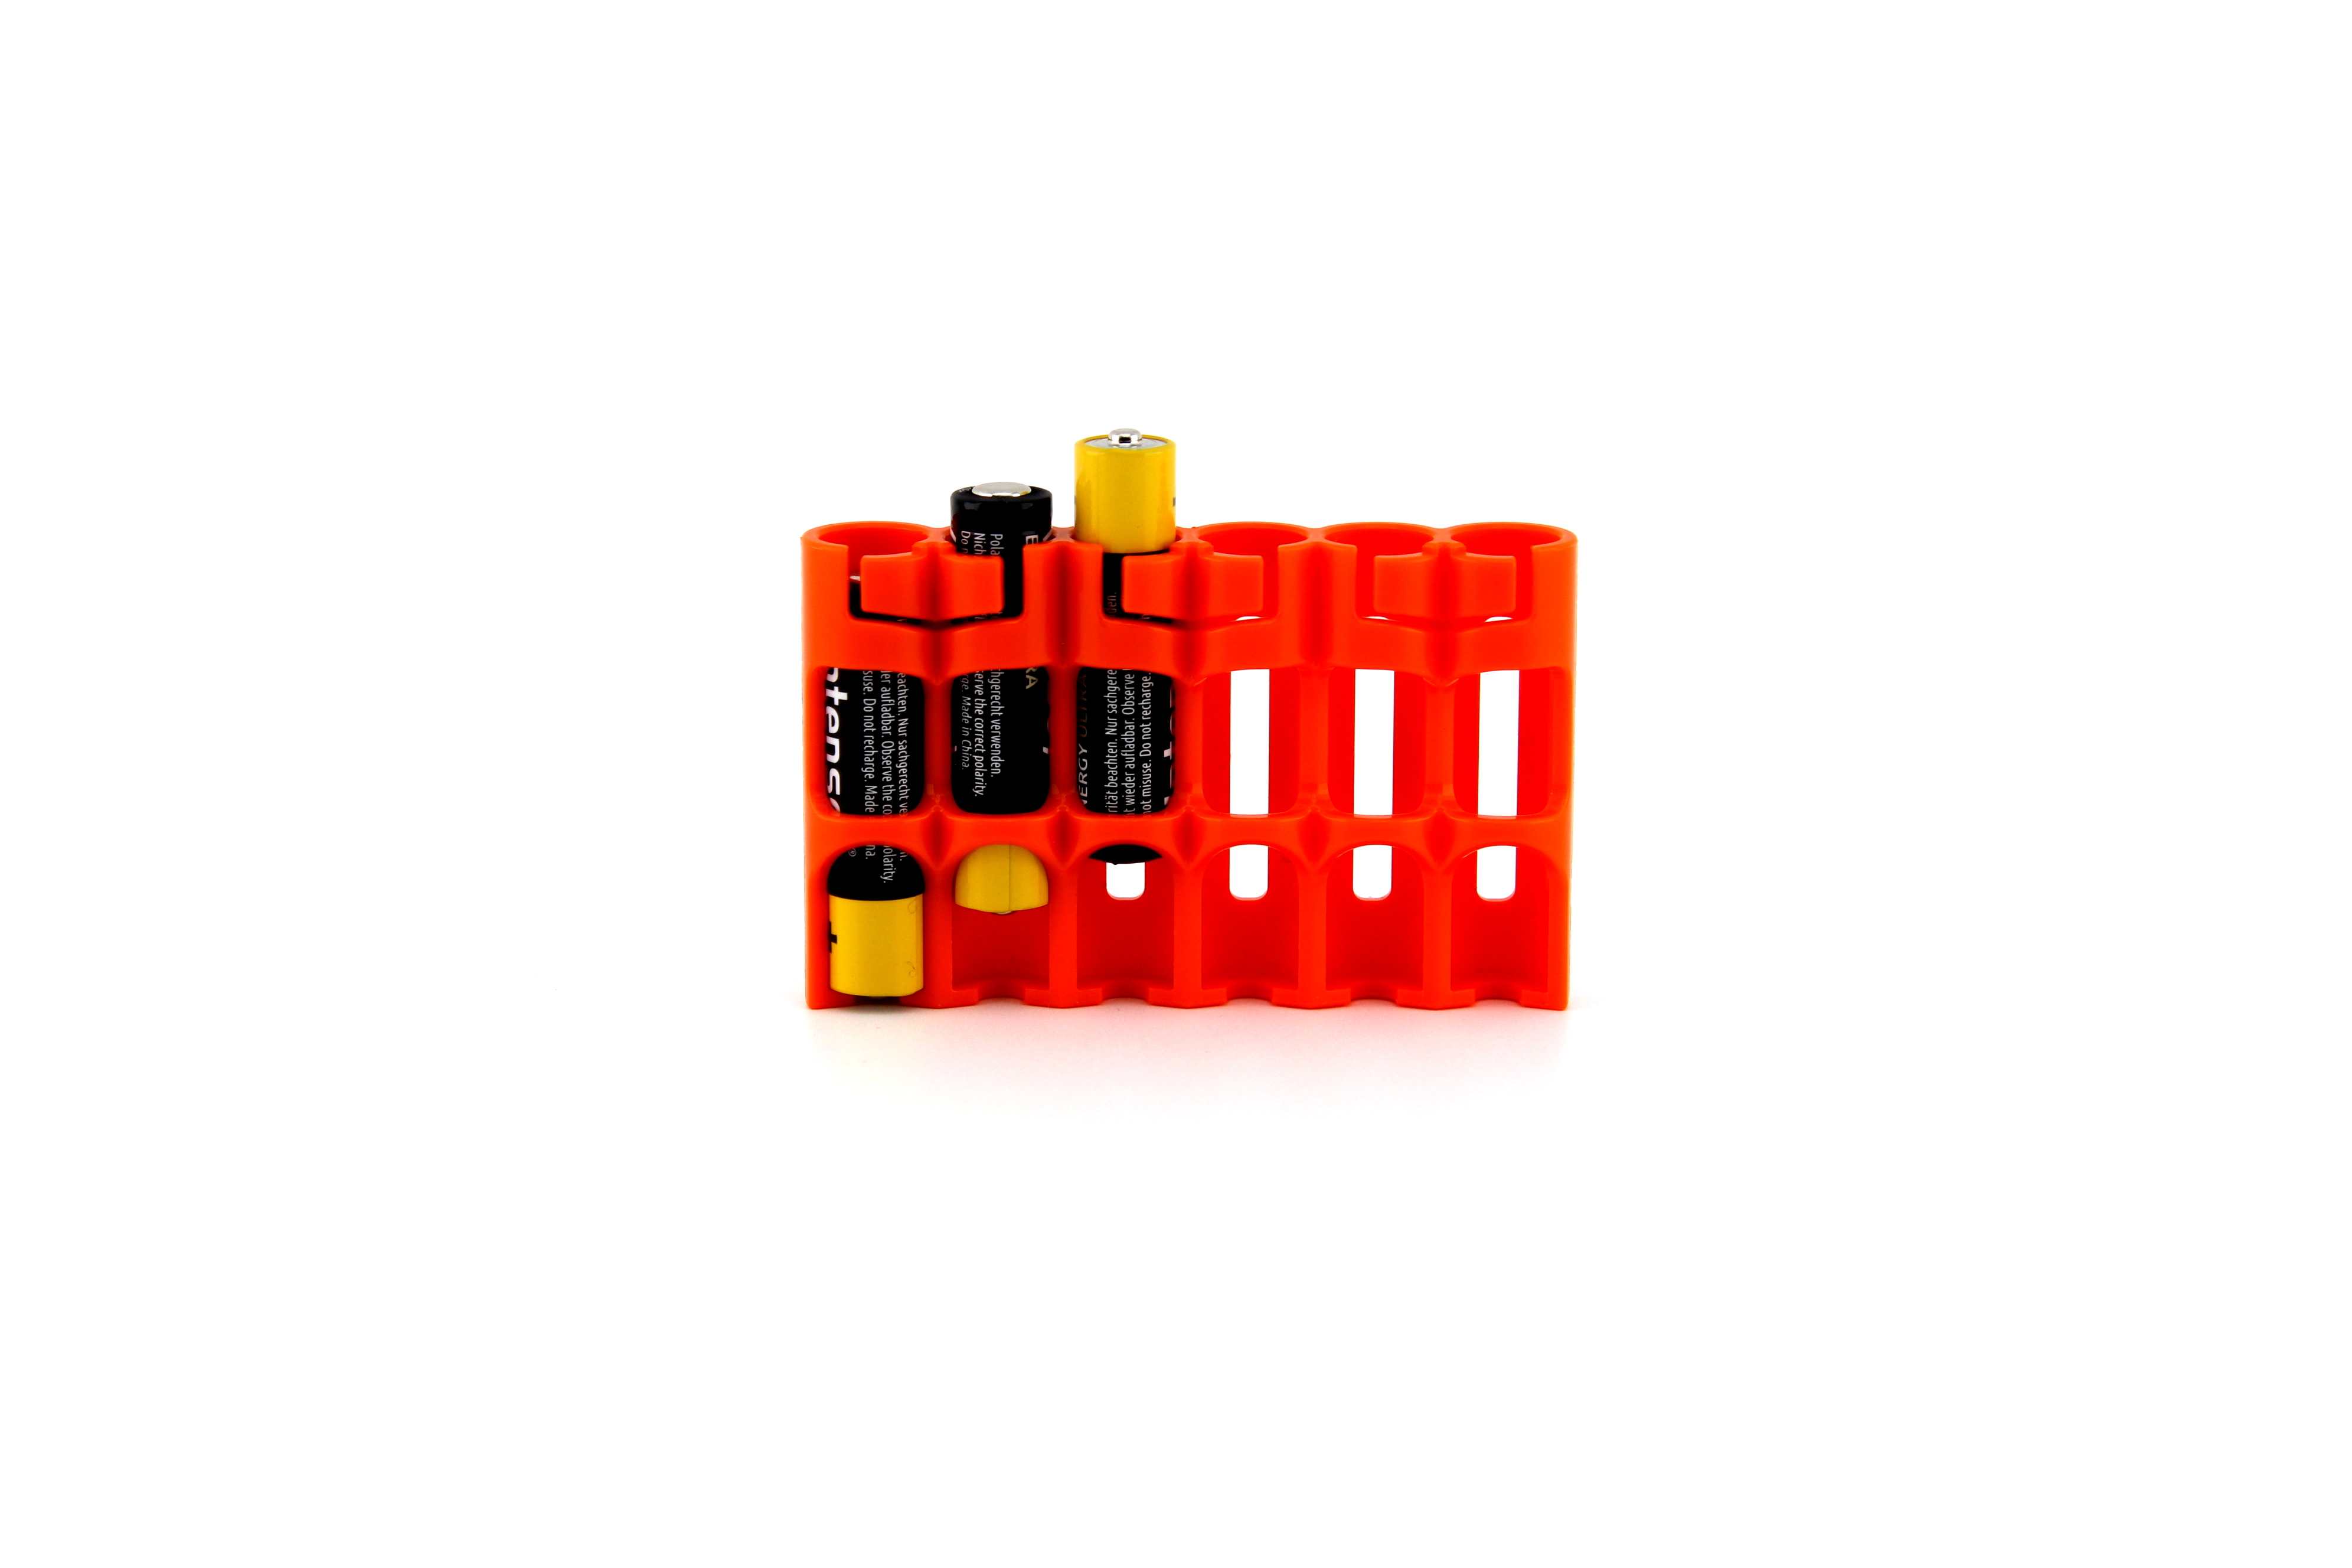 STORACELL Battery Caddy